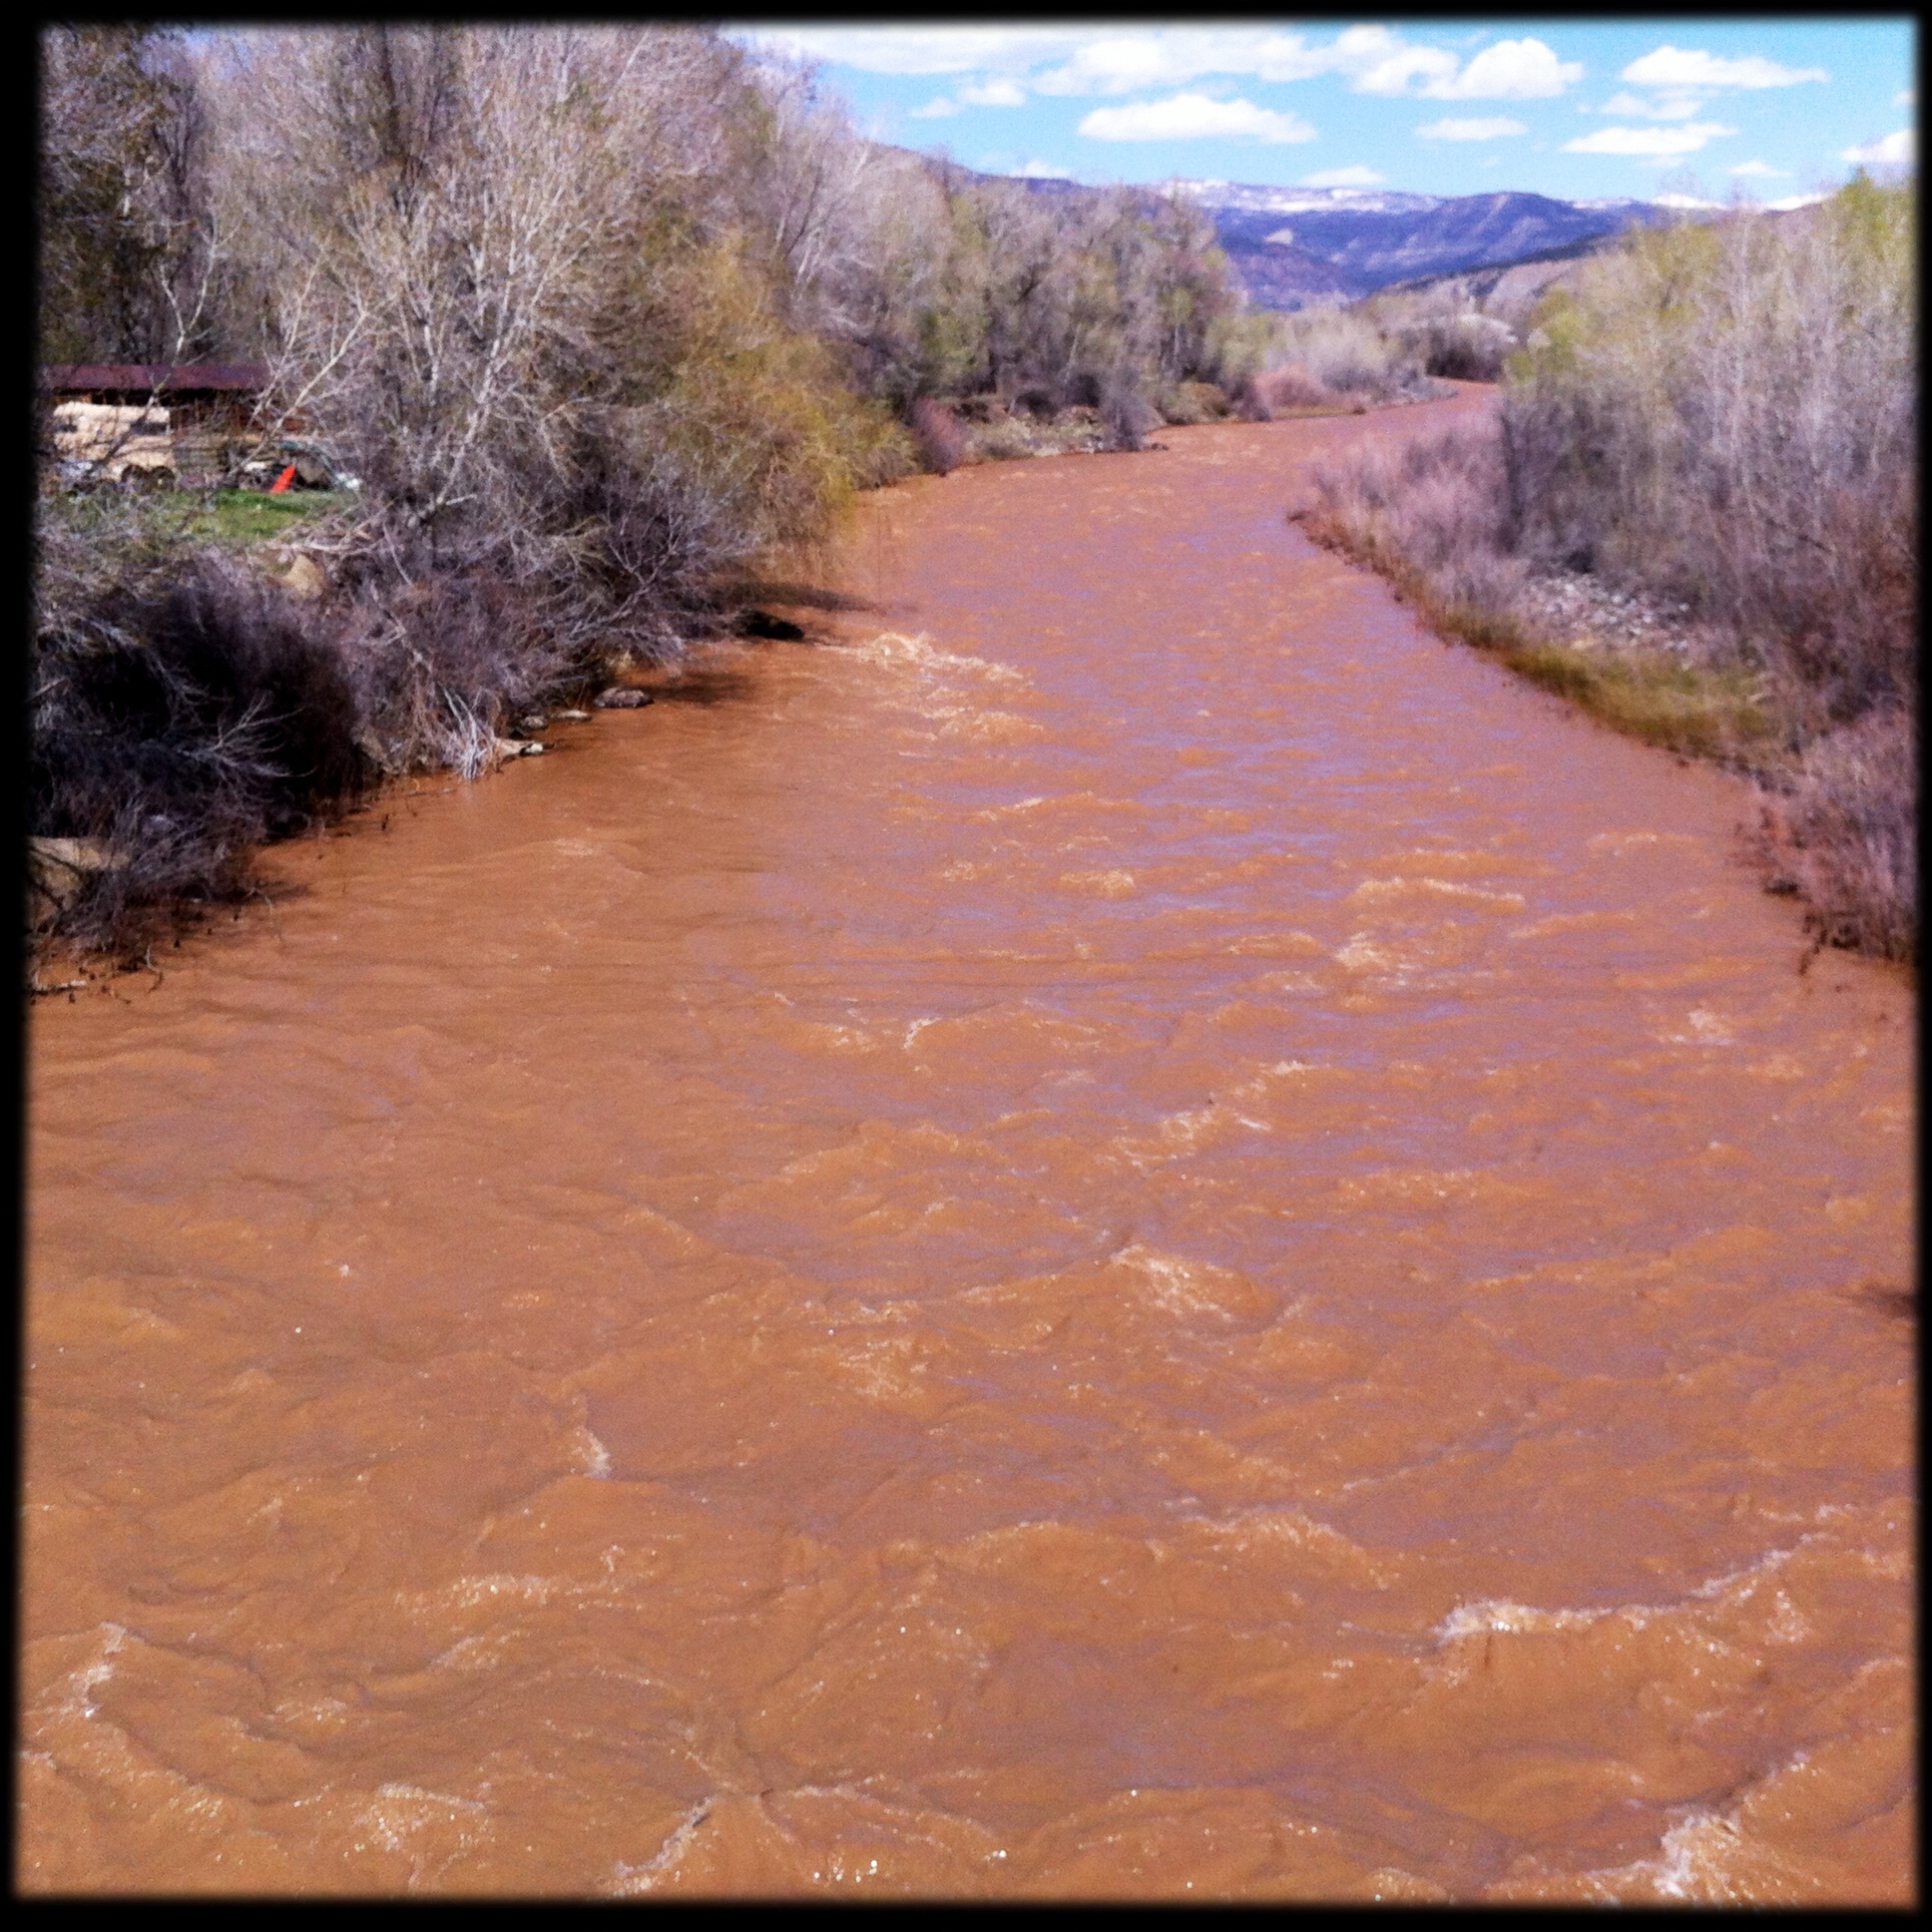 The river runs full and red yesterday through Paonia.